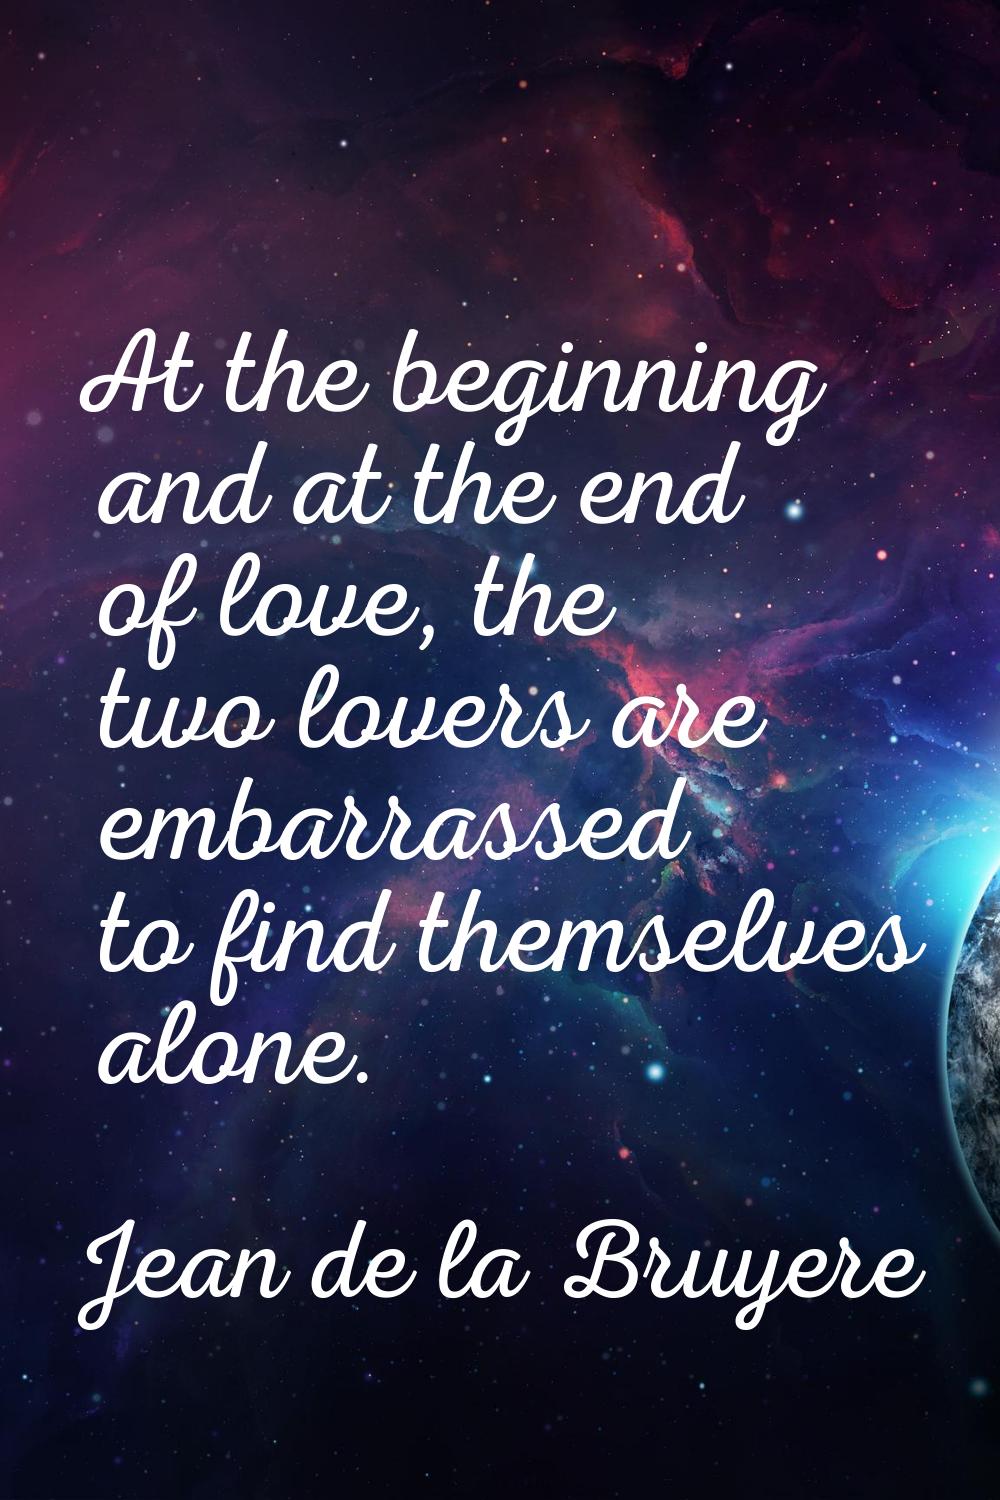 At the beginning and at the end of love, the two lovers are embarrassed to find themselves alone.